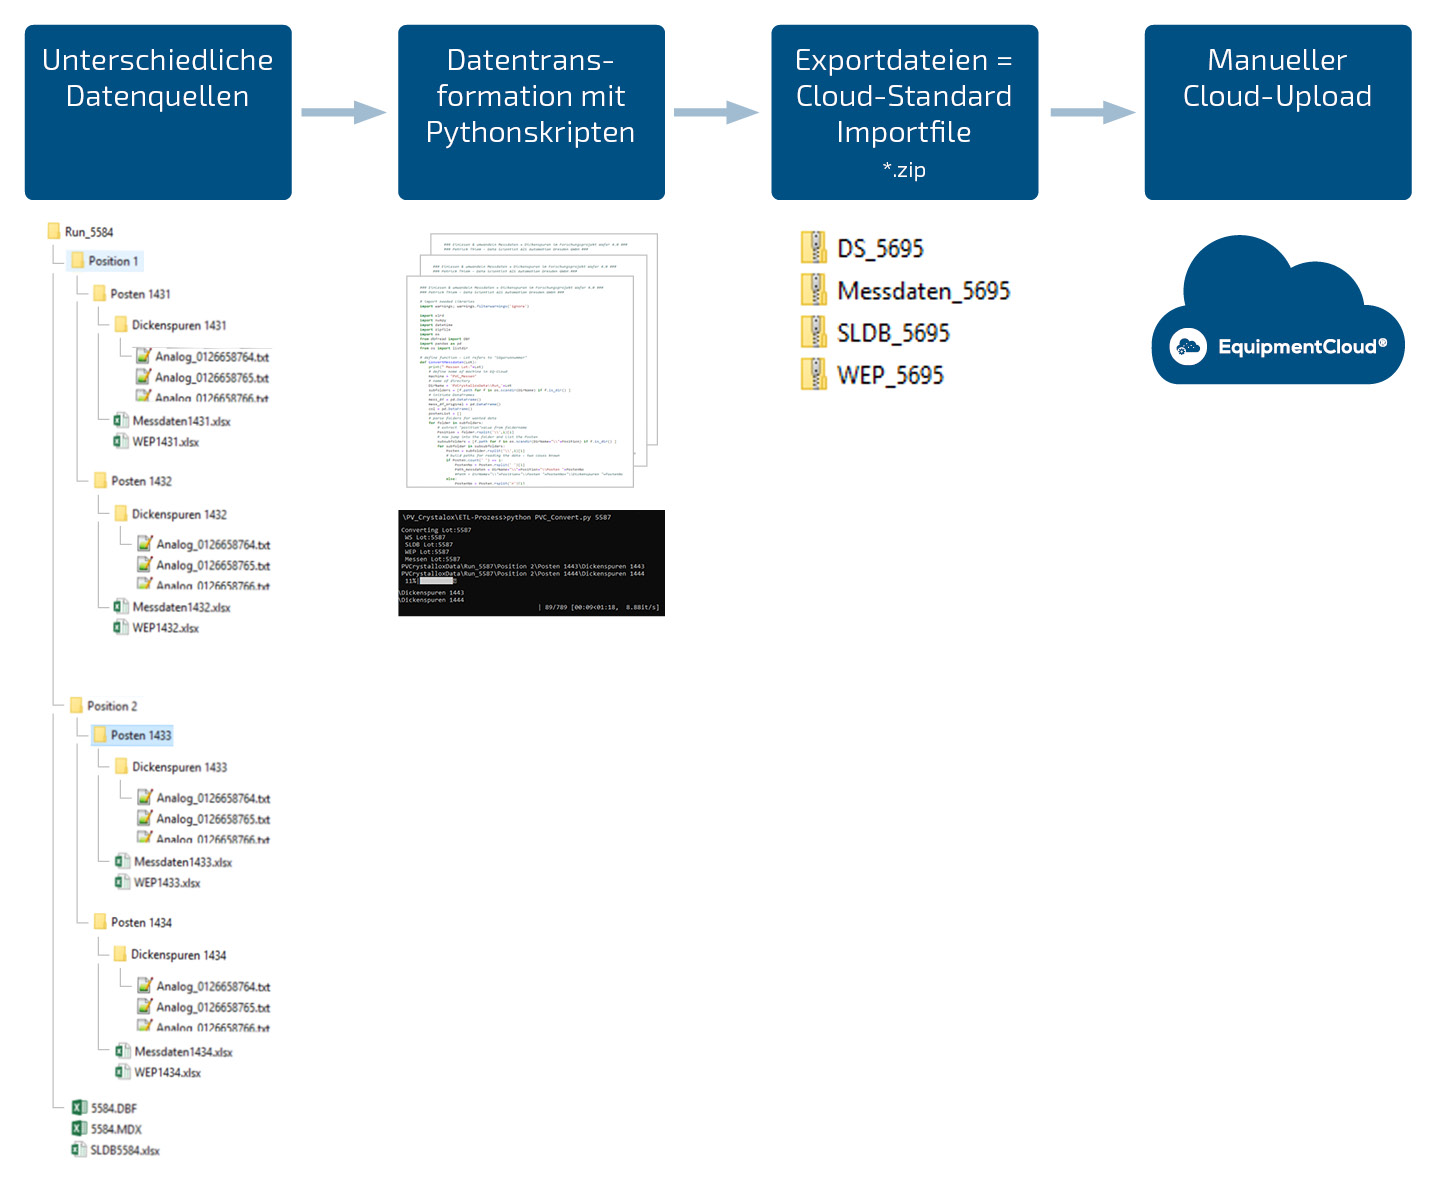 Illustration of how data is imported to the monitoring module in EquipmentCloud®